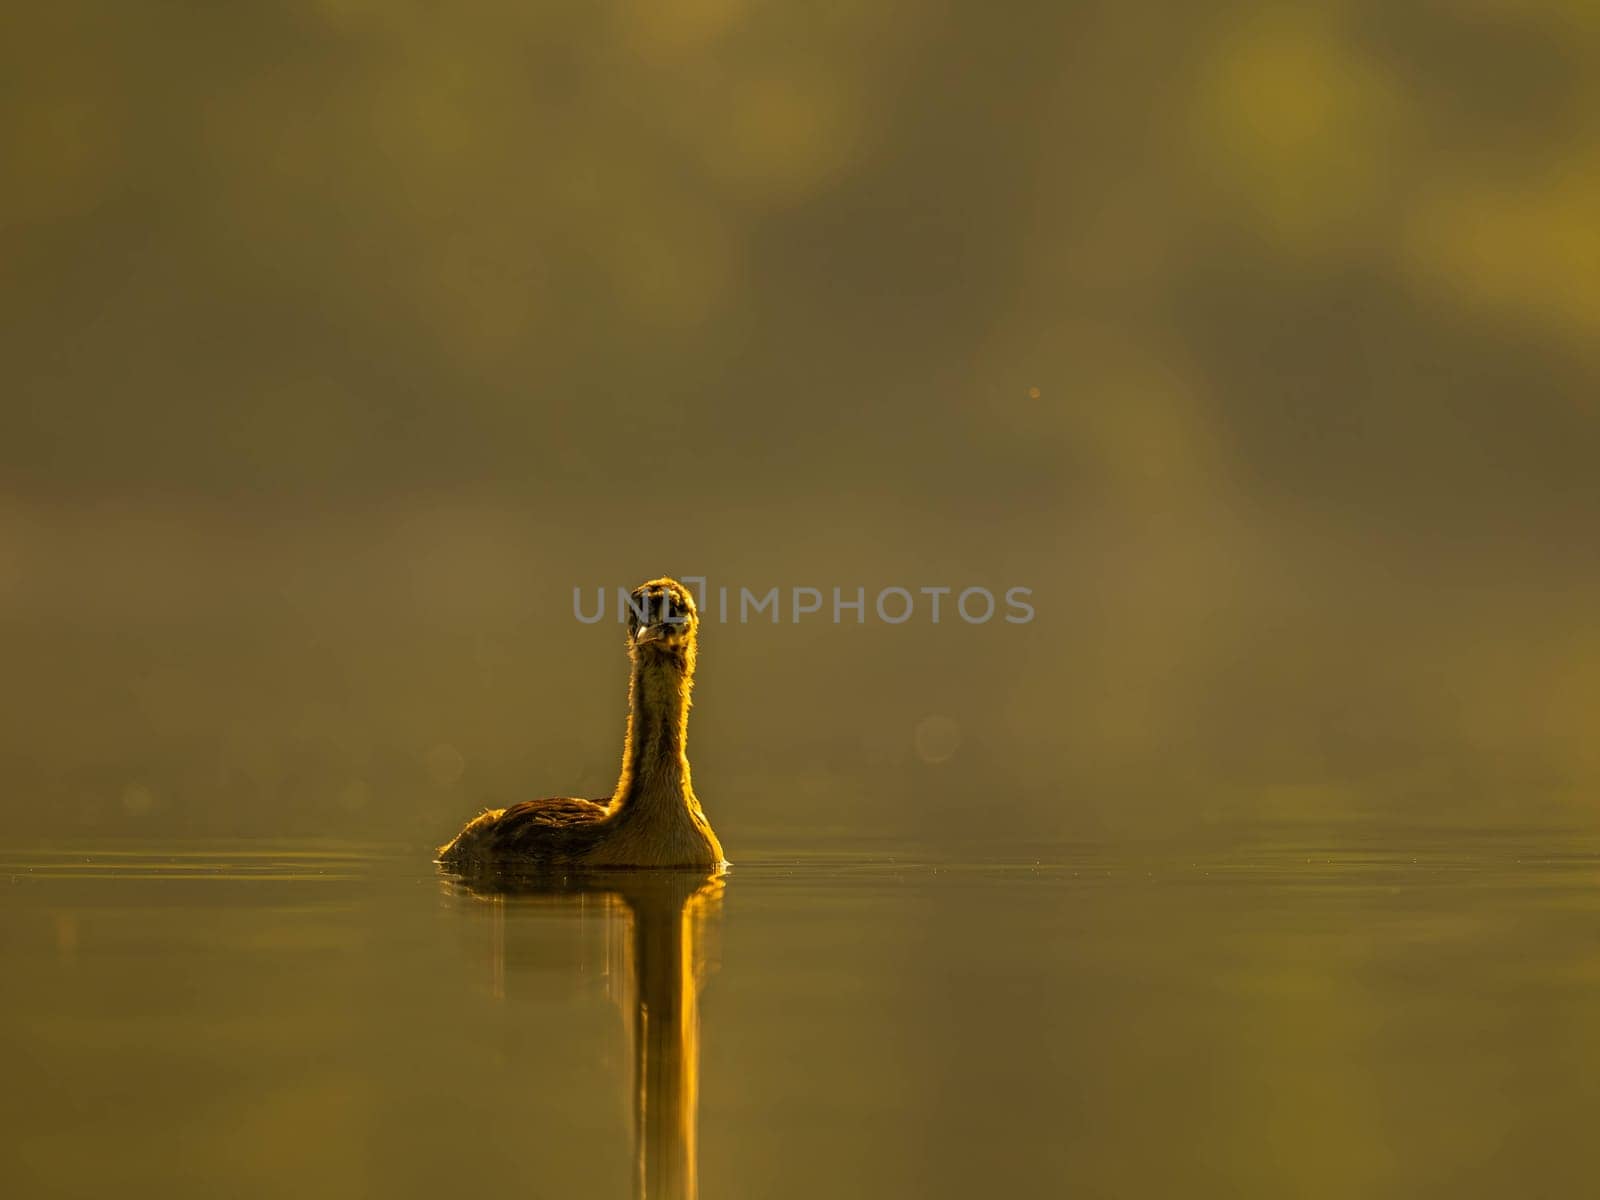 A young Great Crested Grebe peacefully floats on the water, illuminated by the warm hues of the setting sun.